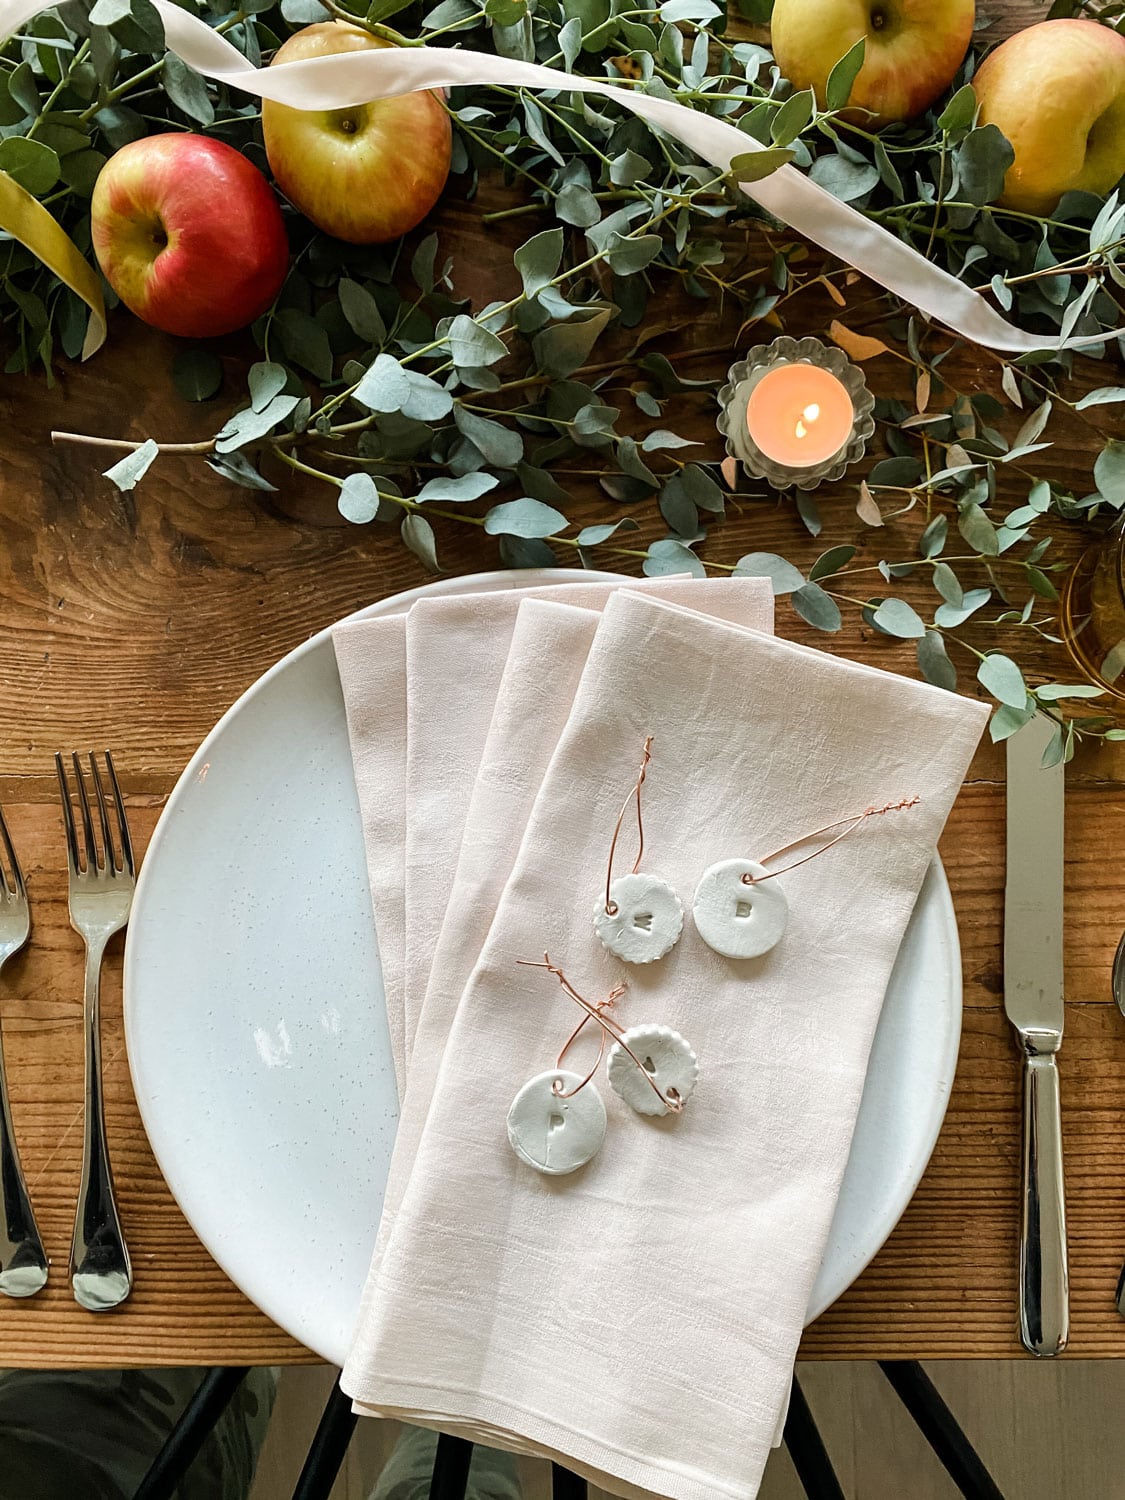 blush napkins with clay tags with initials